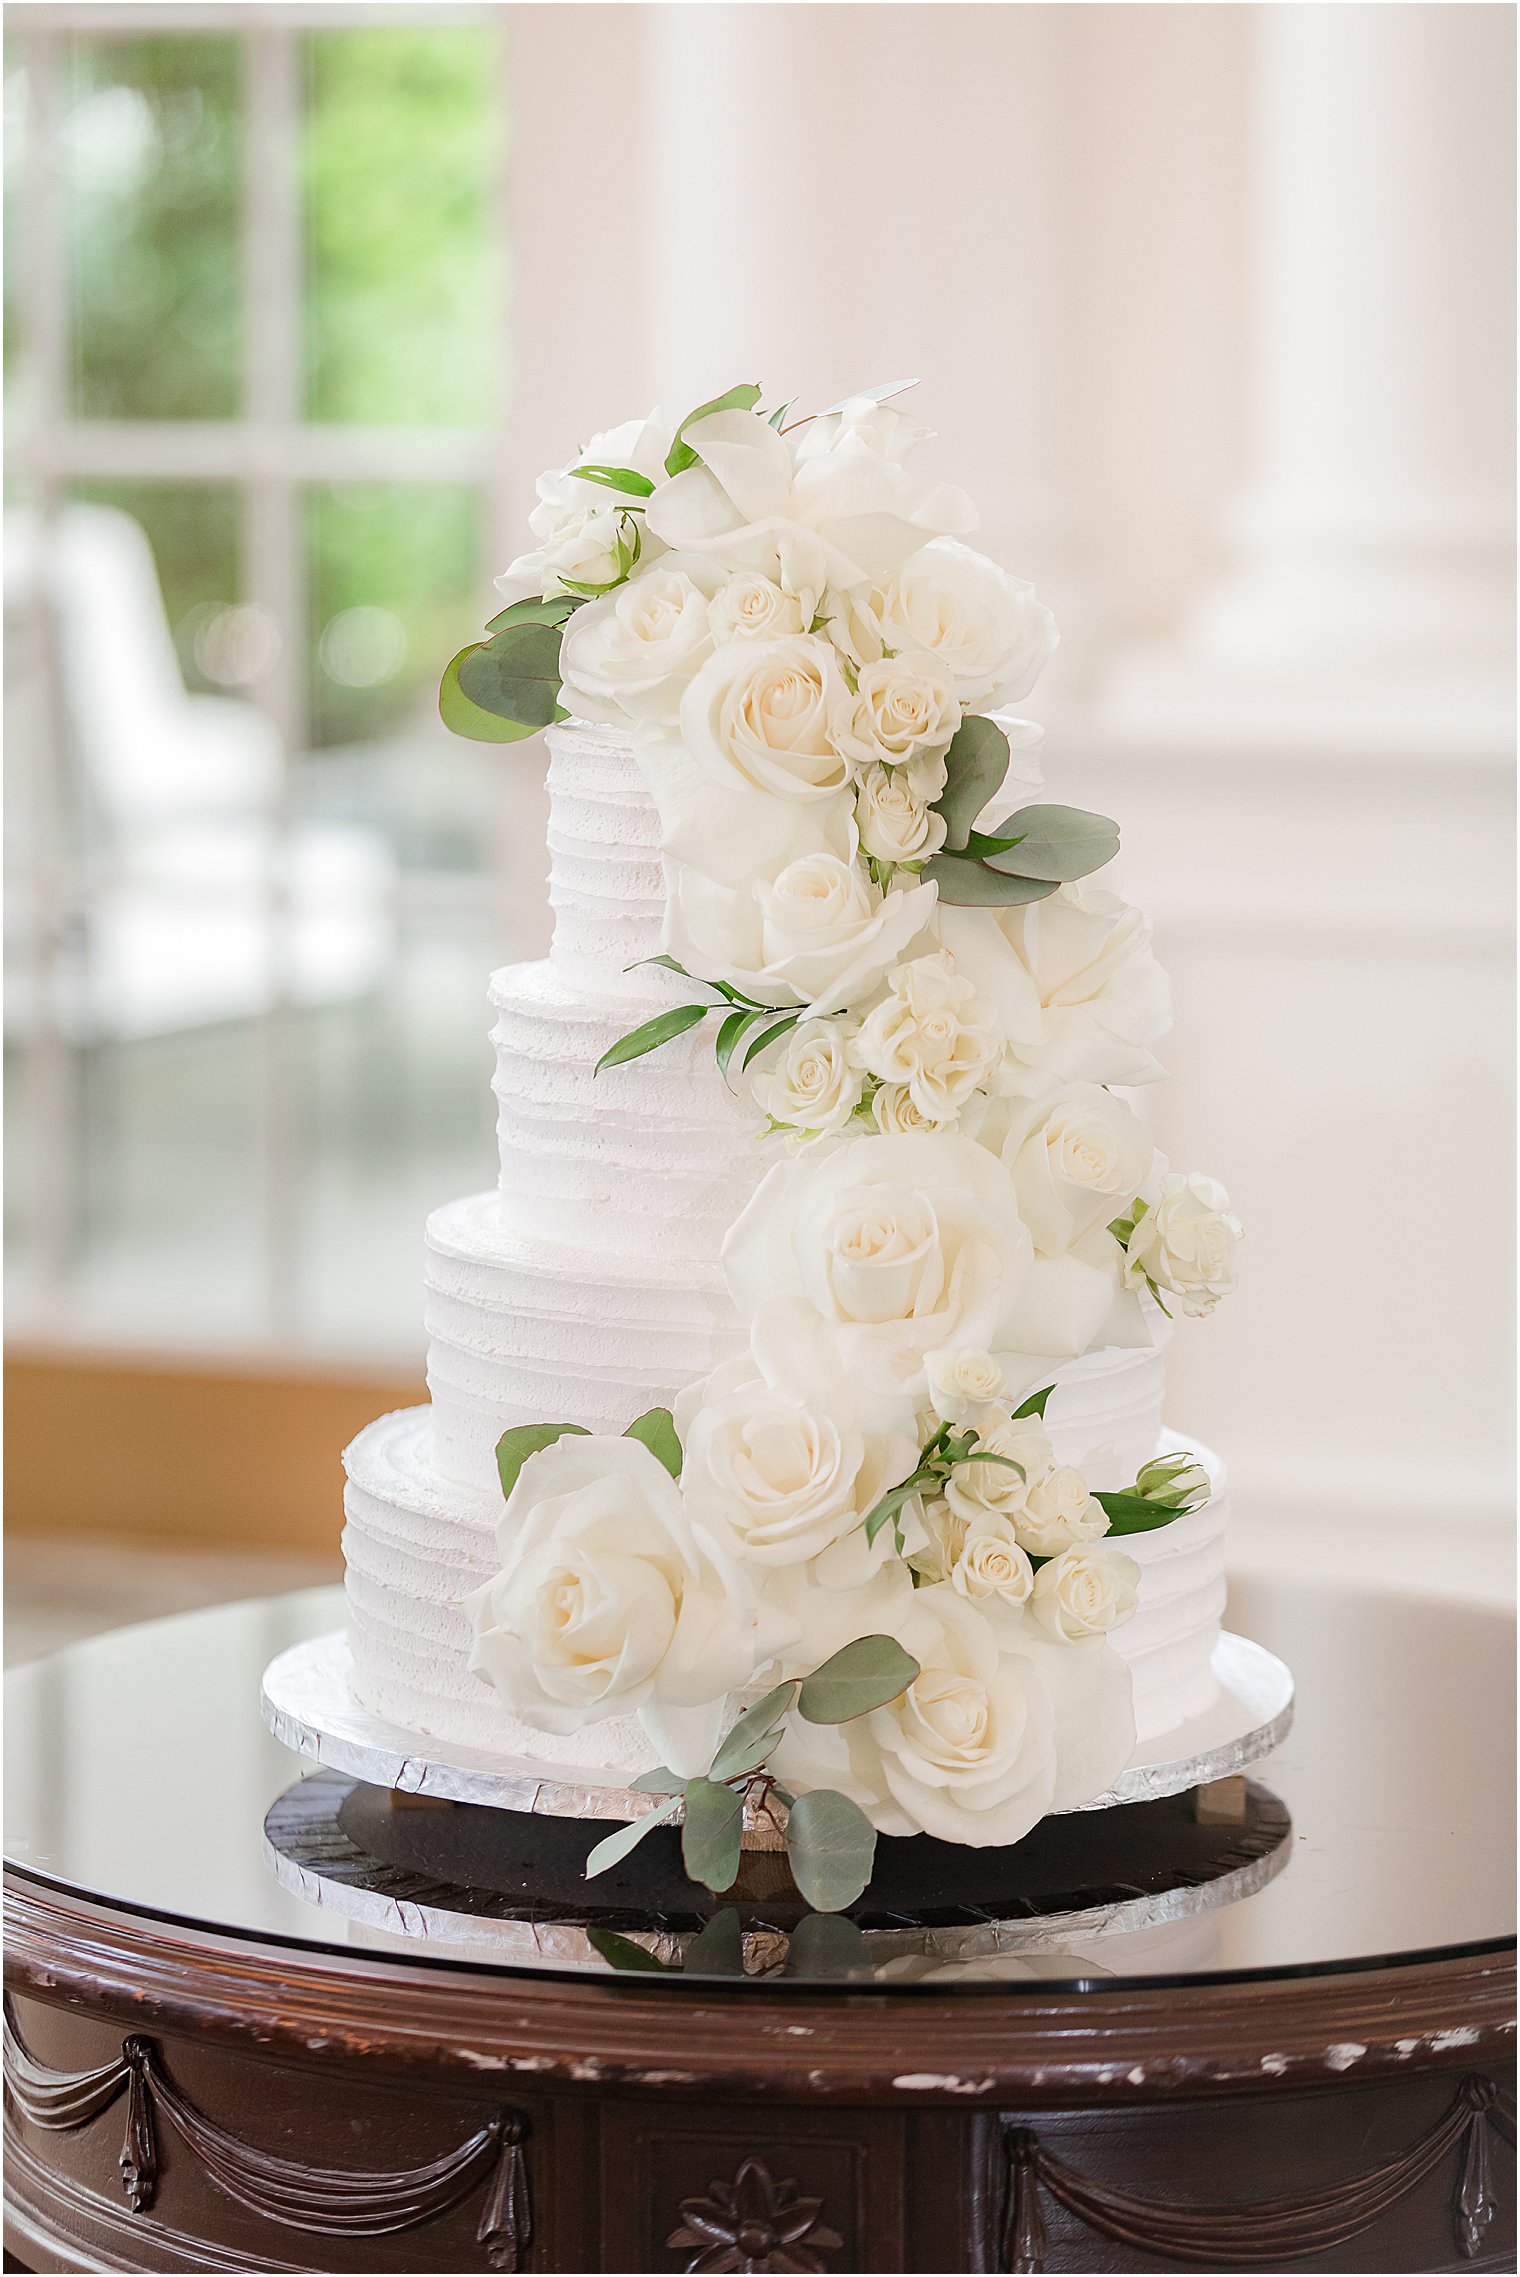 tiered wedding cake with white flower accents